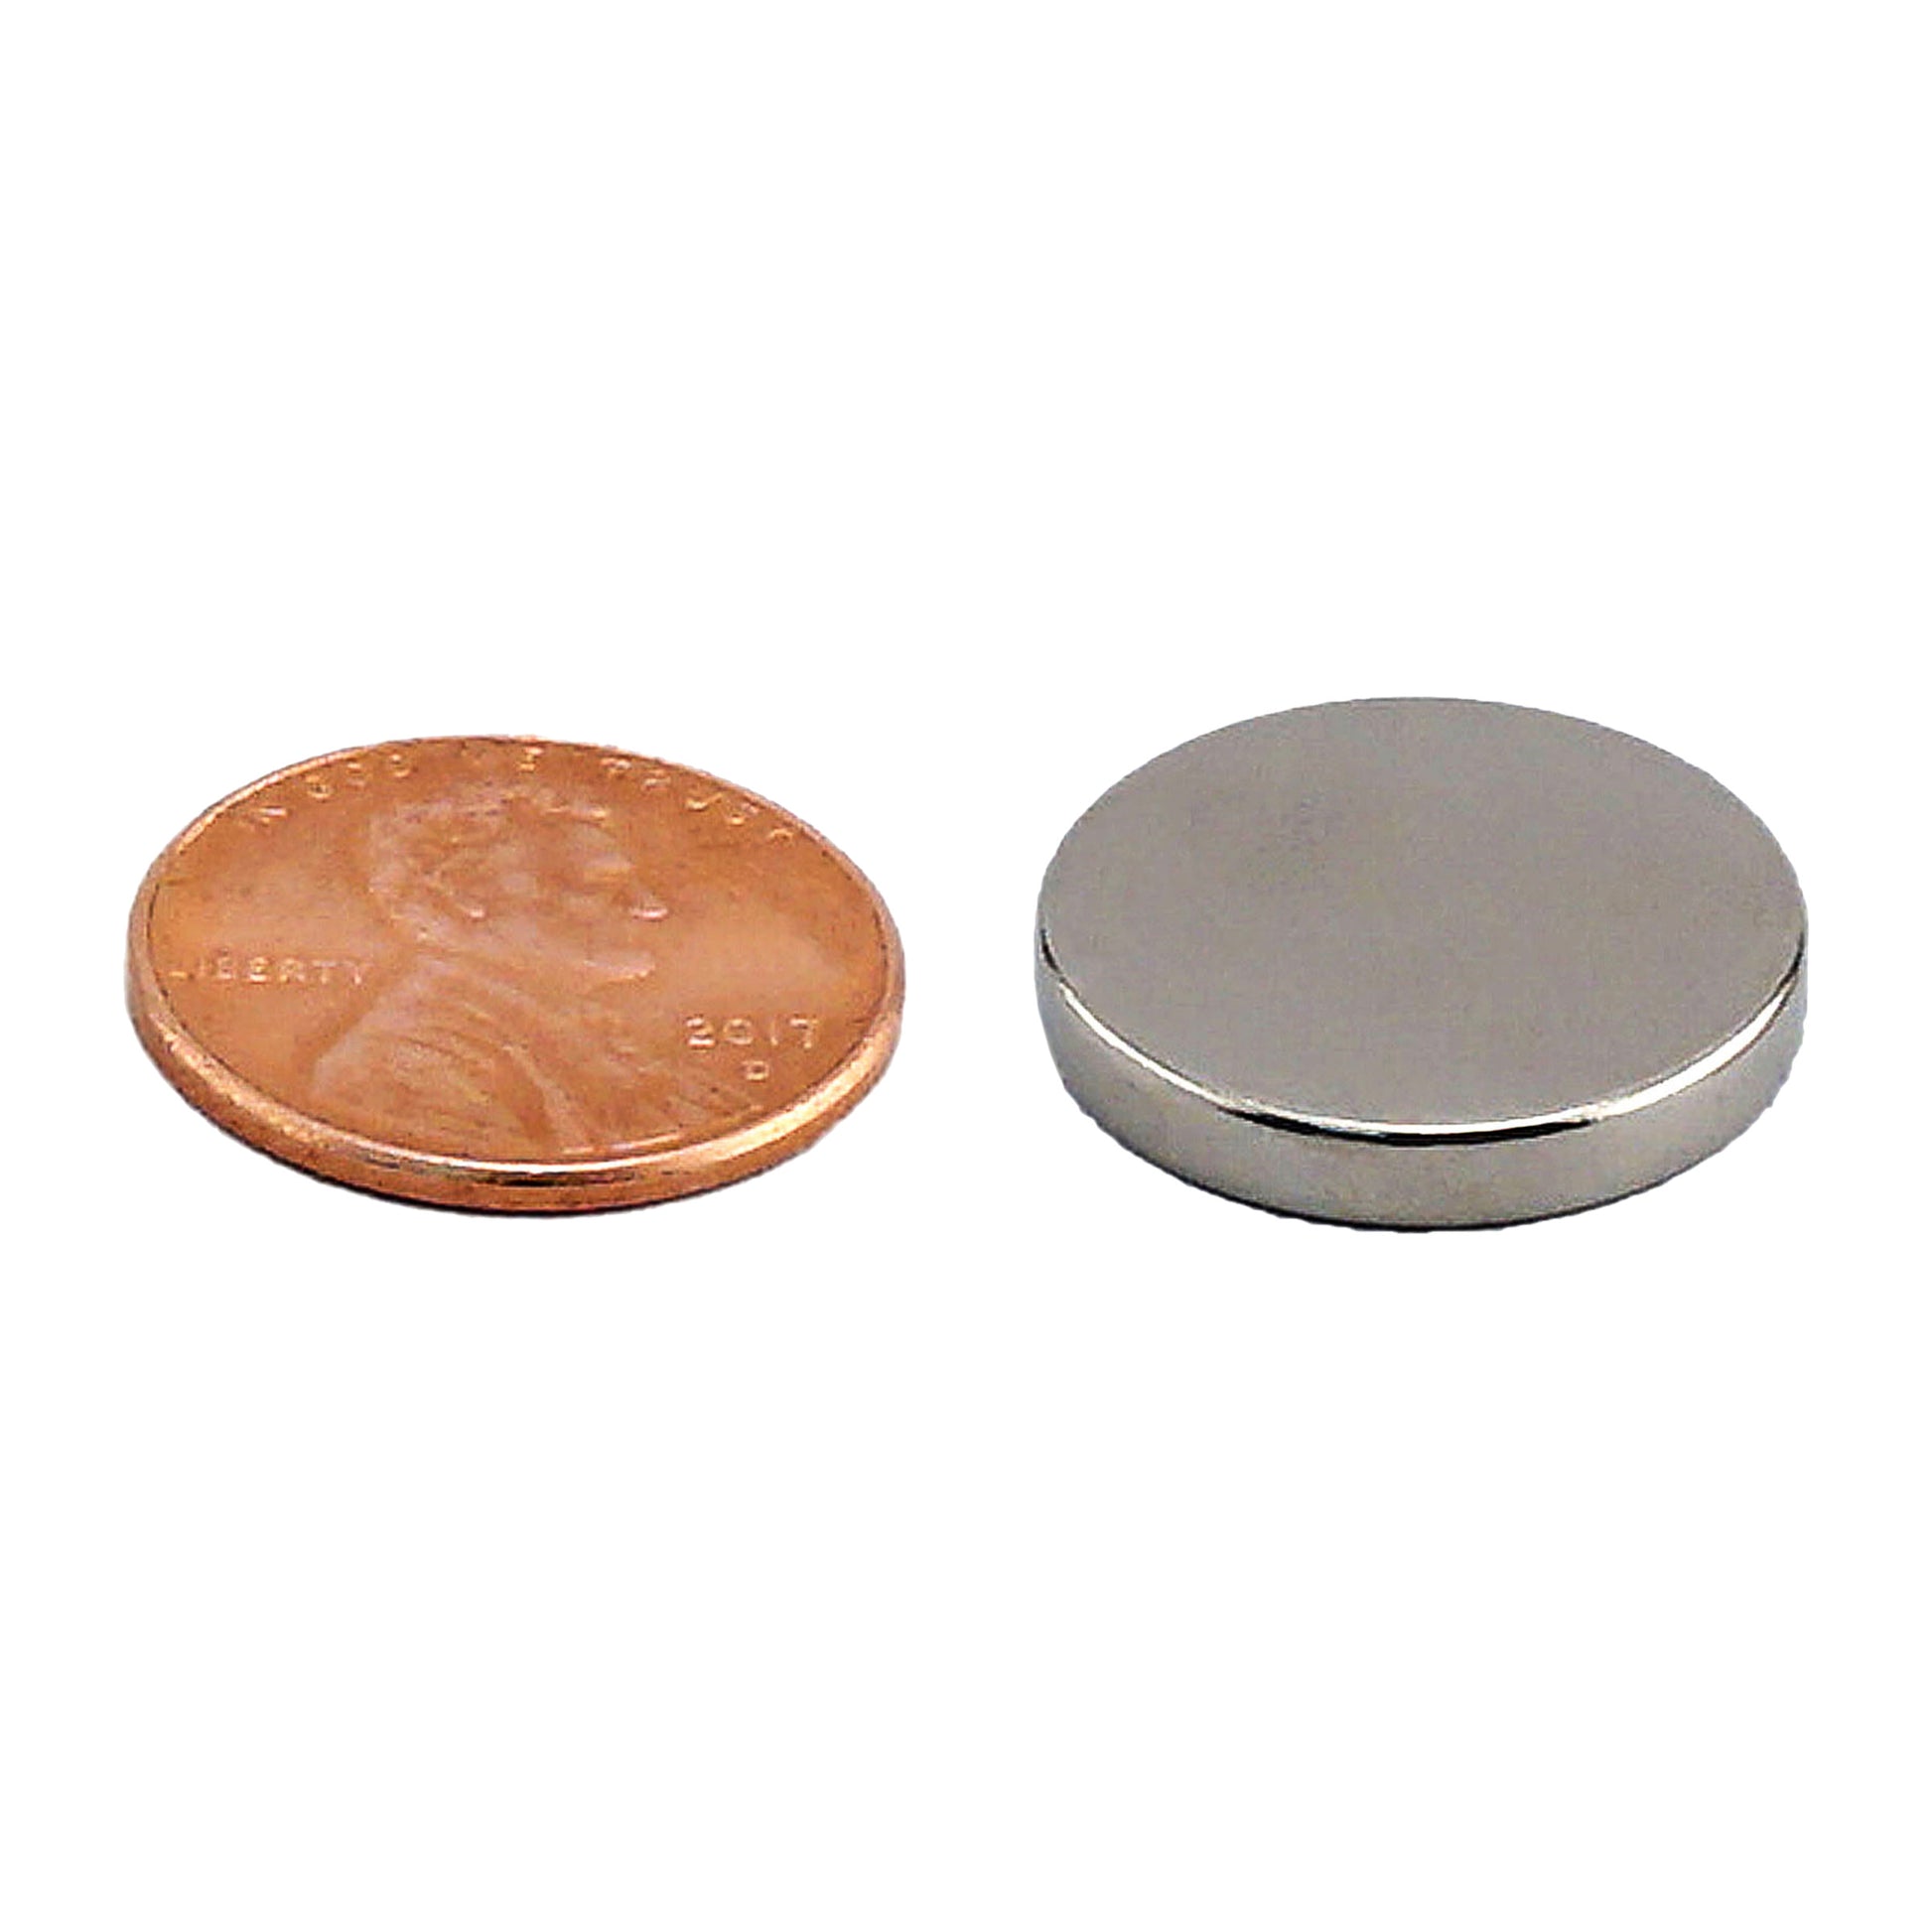 Load image into Gallery viewer, ND45-7512N Neodymium Disc Magnet - Compared to Penny for Size Reference